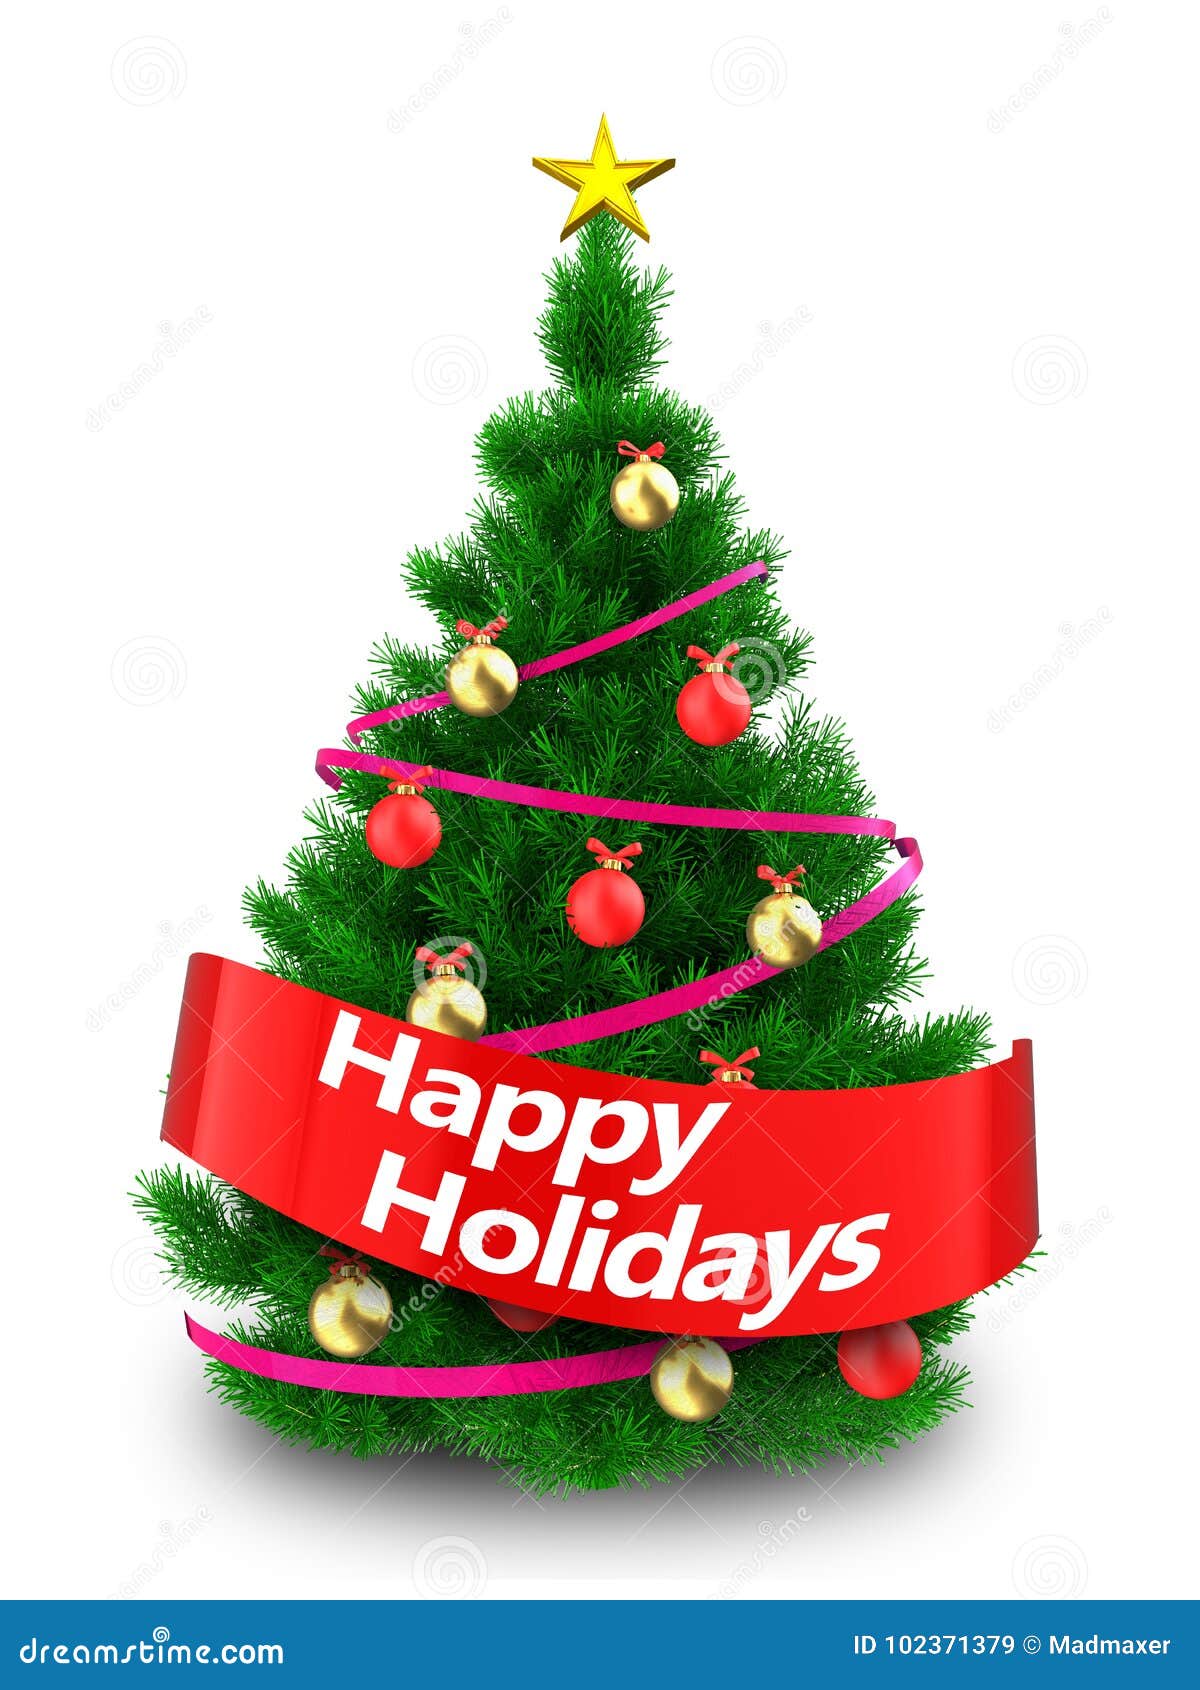 3d christmas tree with happy holidays sign